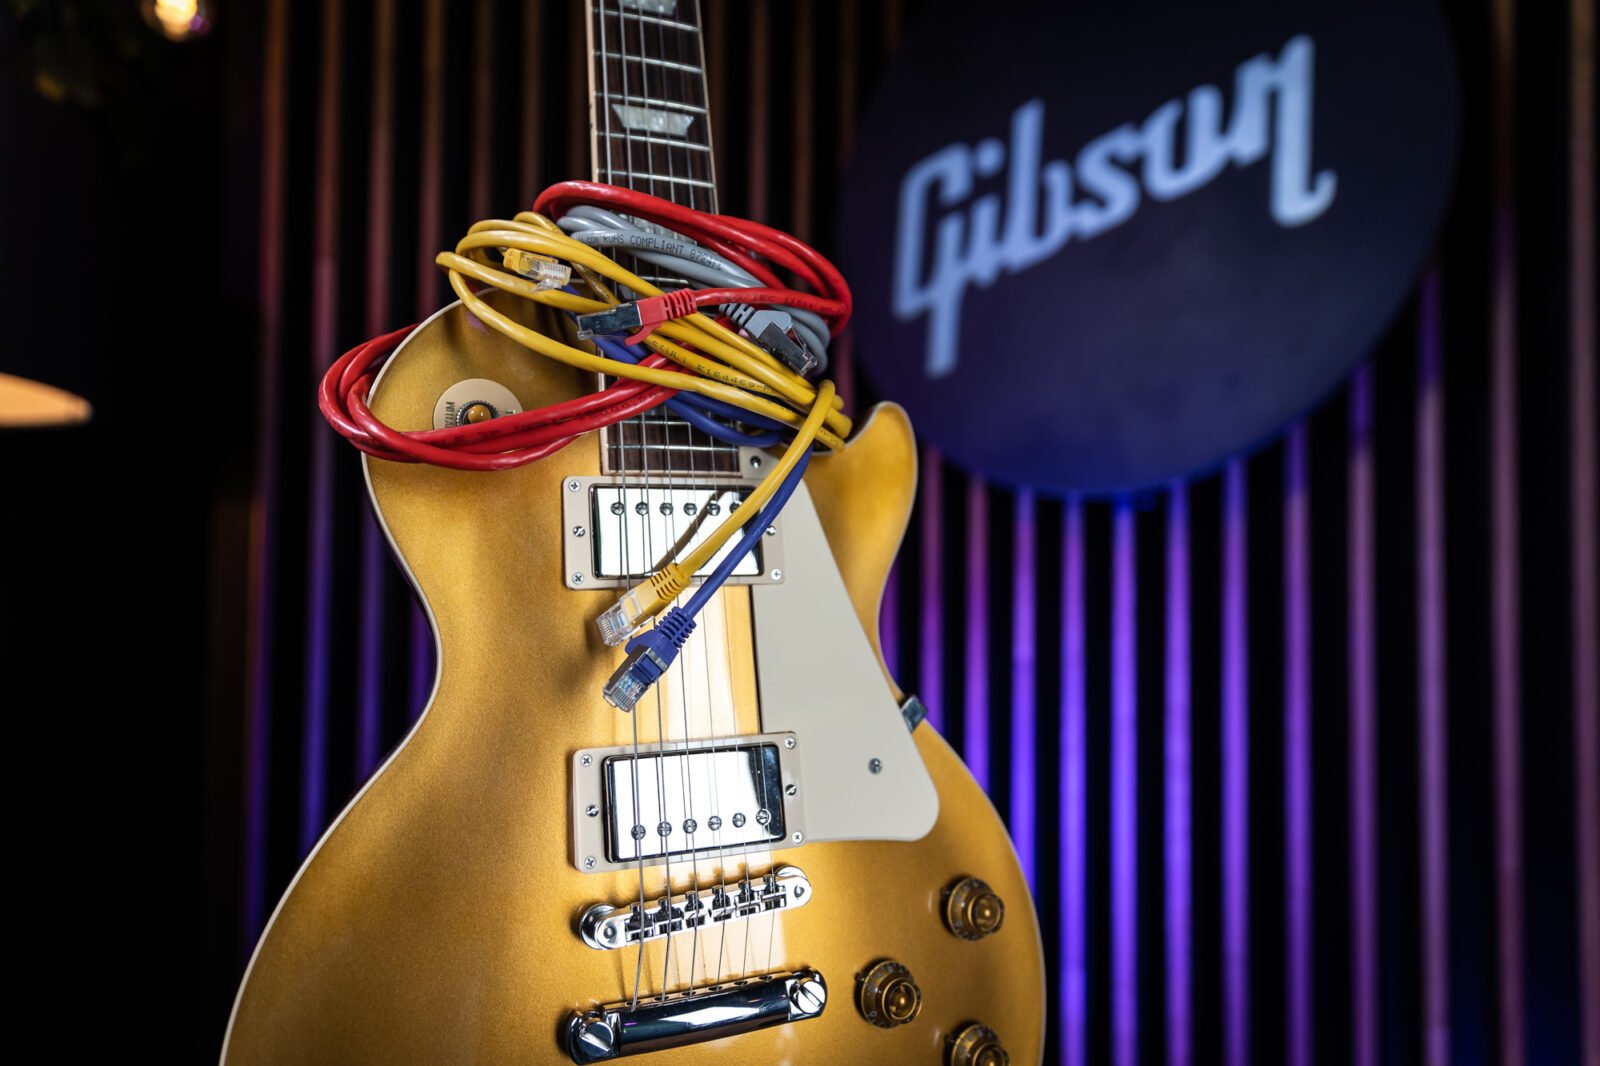 Gibson guitar office automation